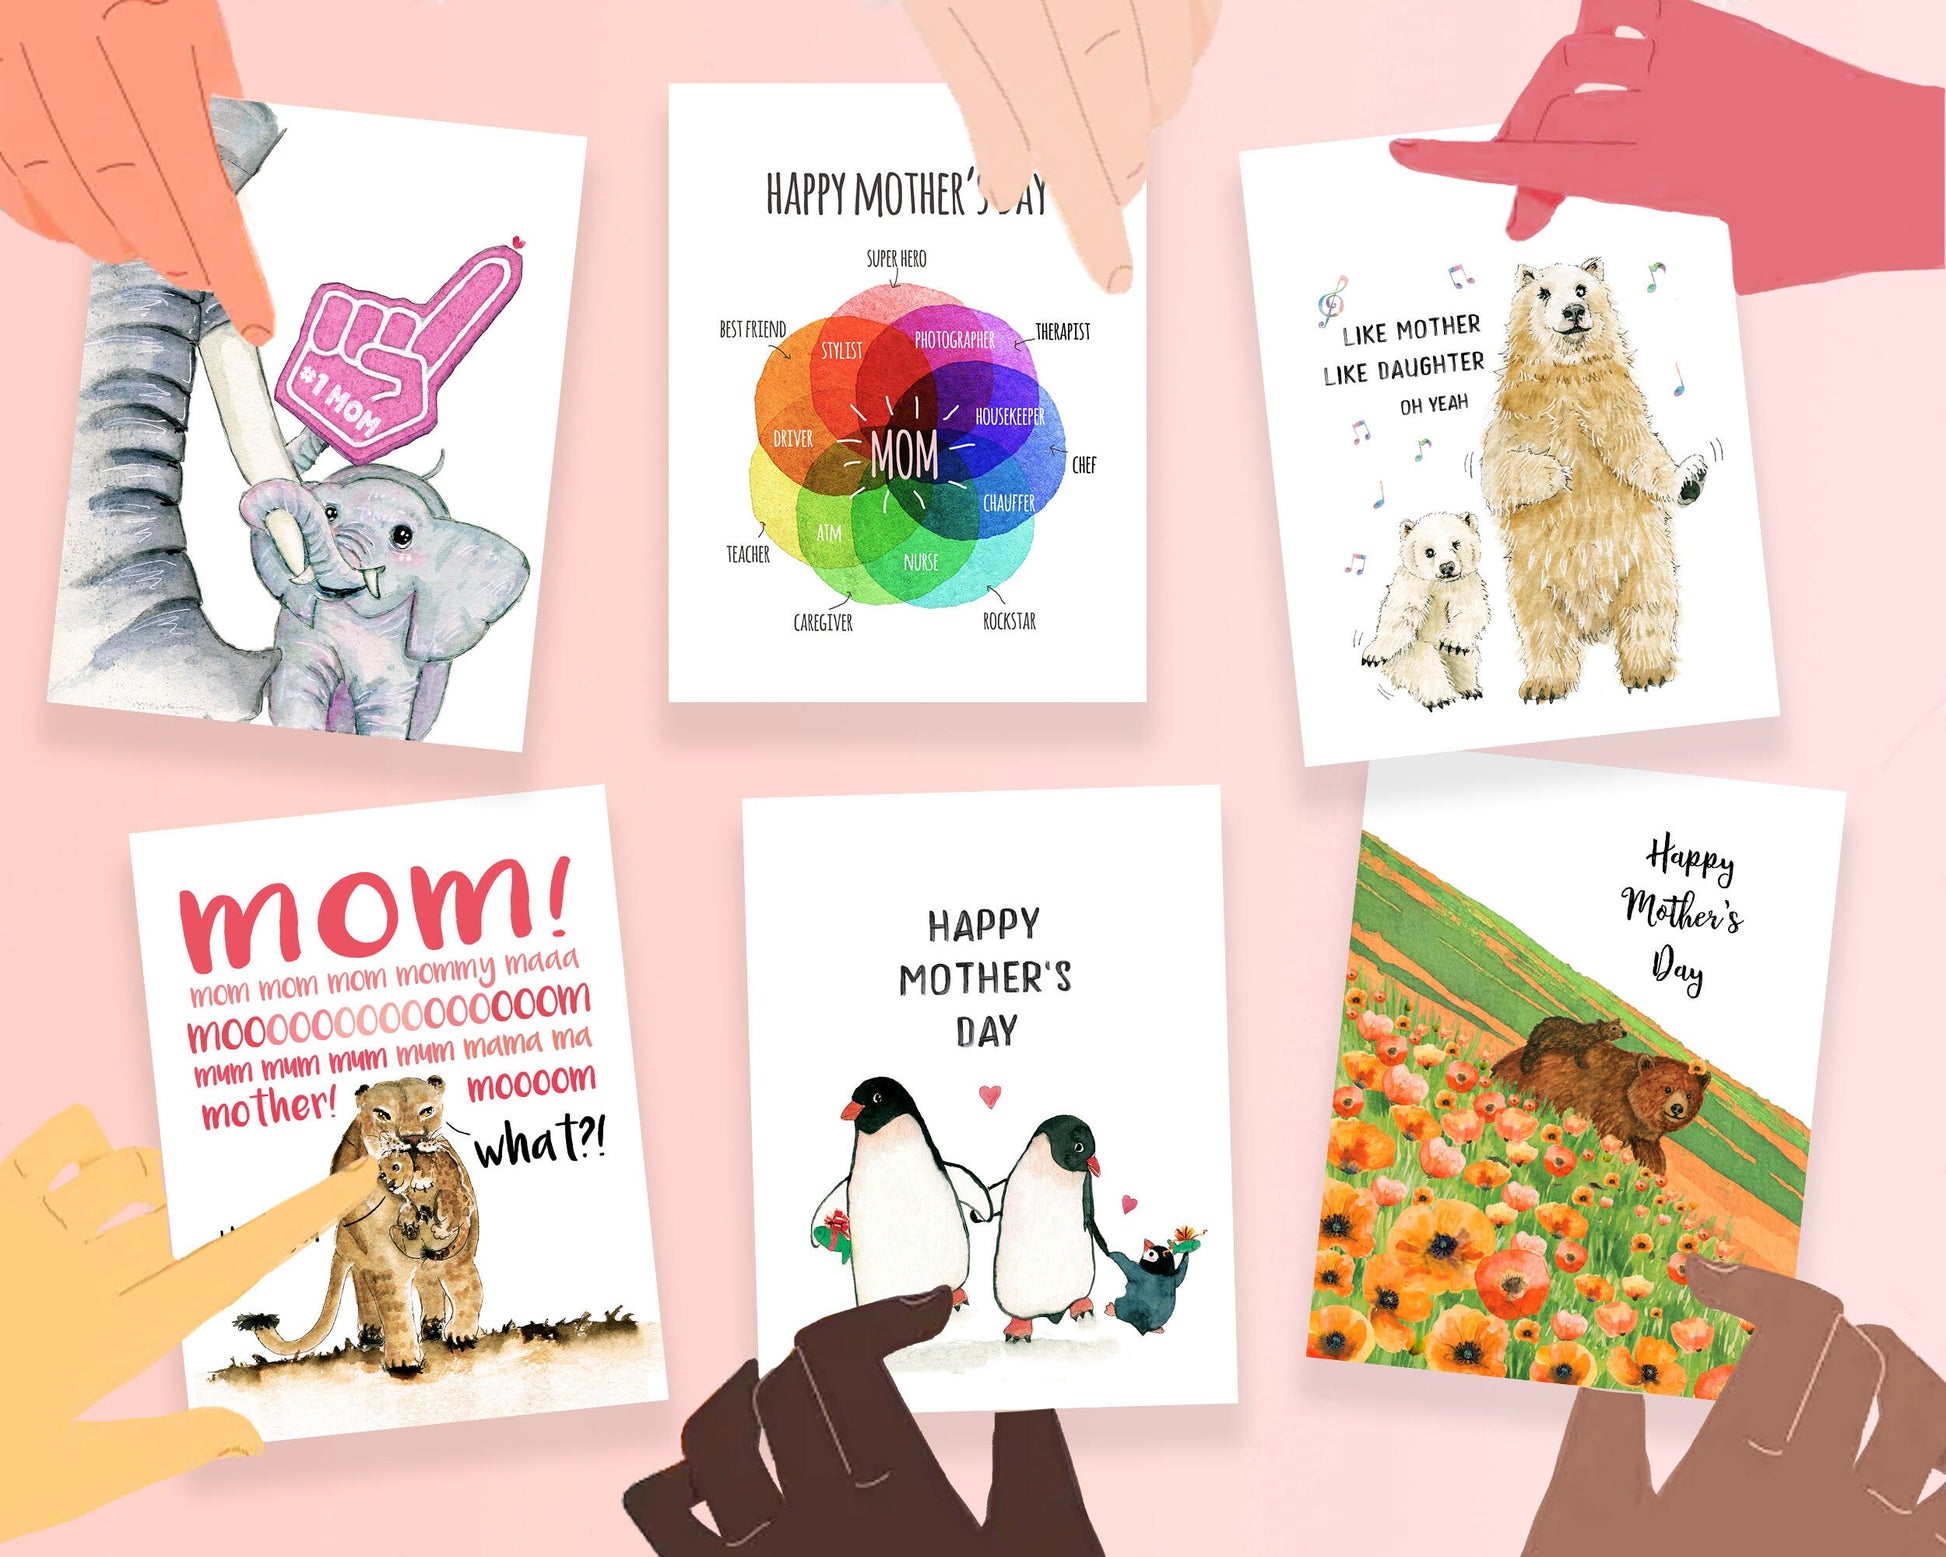 Grand Kitty Grandma Mother's Day Card From The Cat - Cat Lover Happy Mother's Day Card Funny - Cat Mom Gifts- Thank You For Raising Me